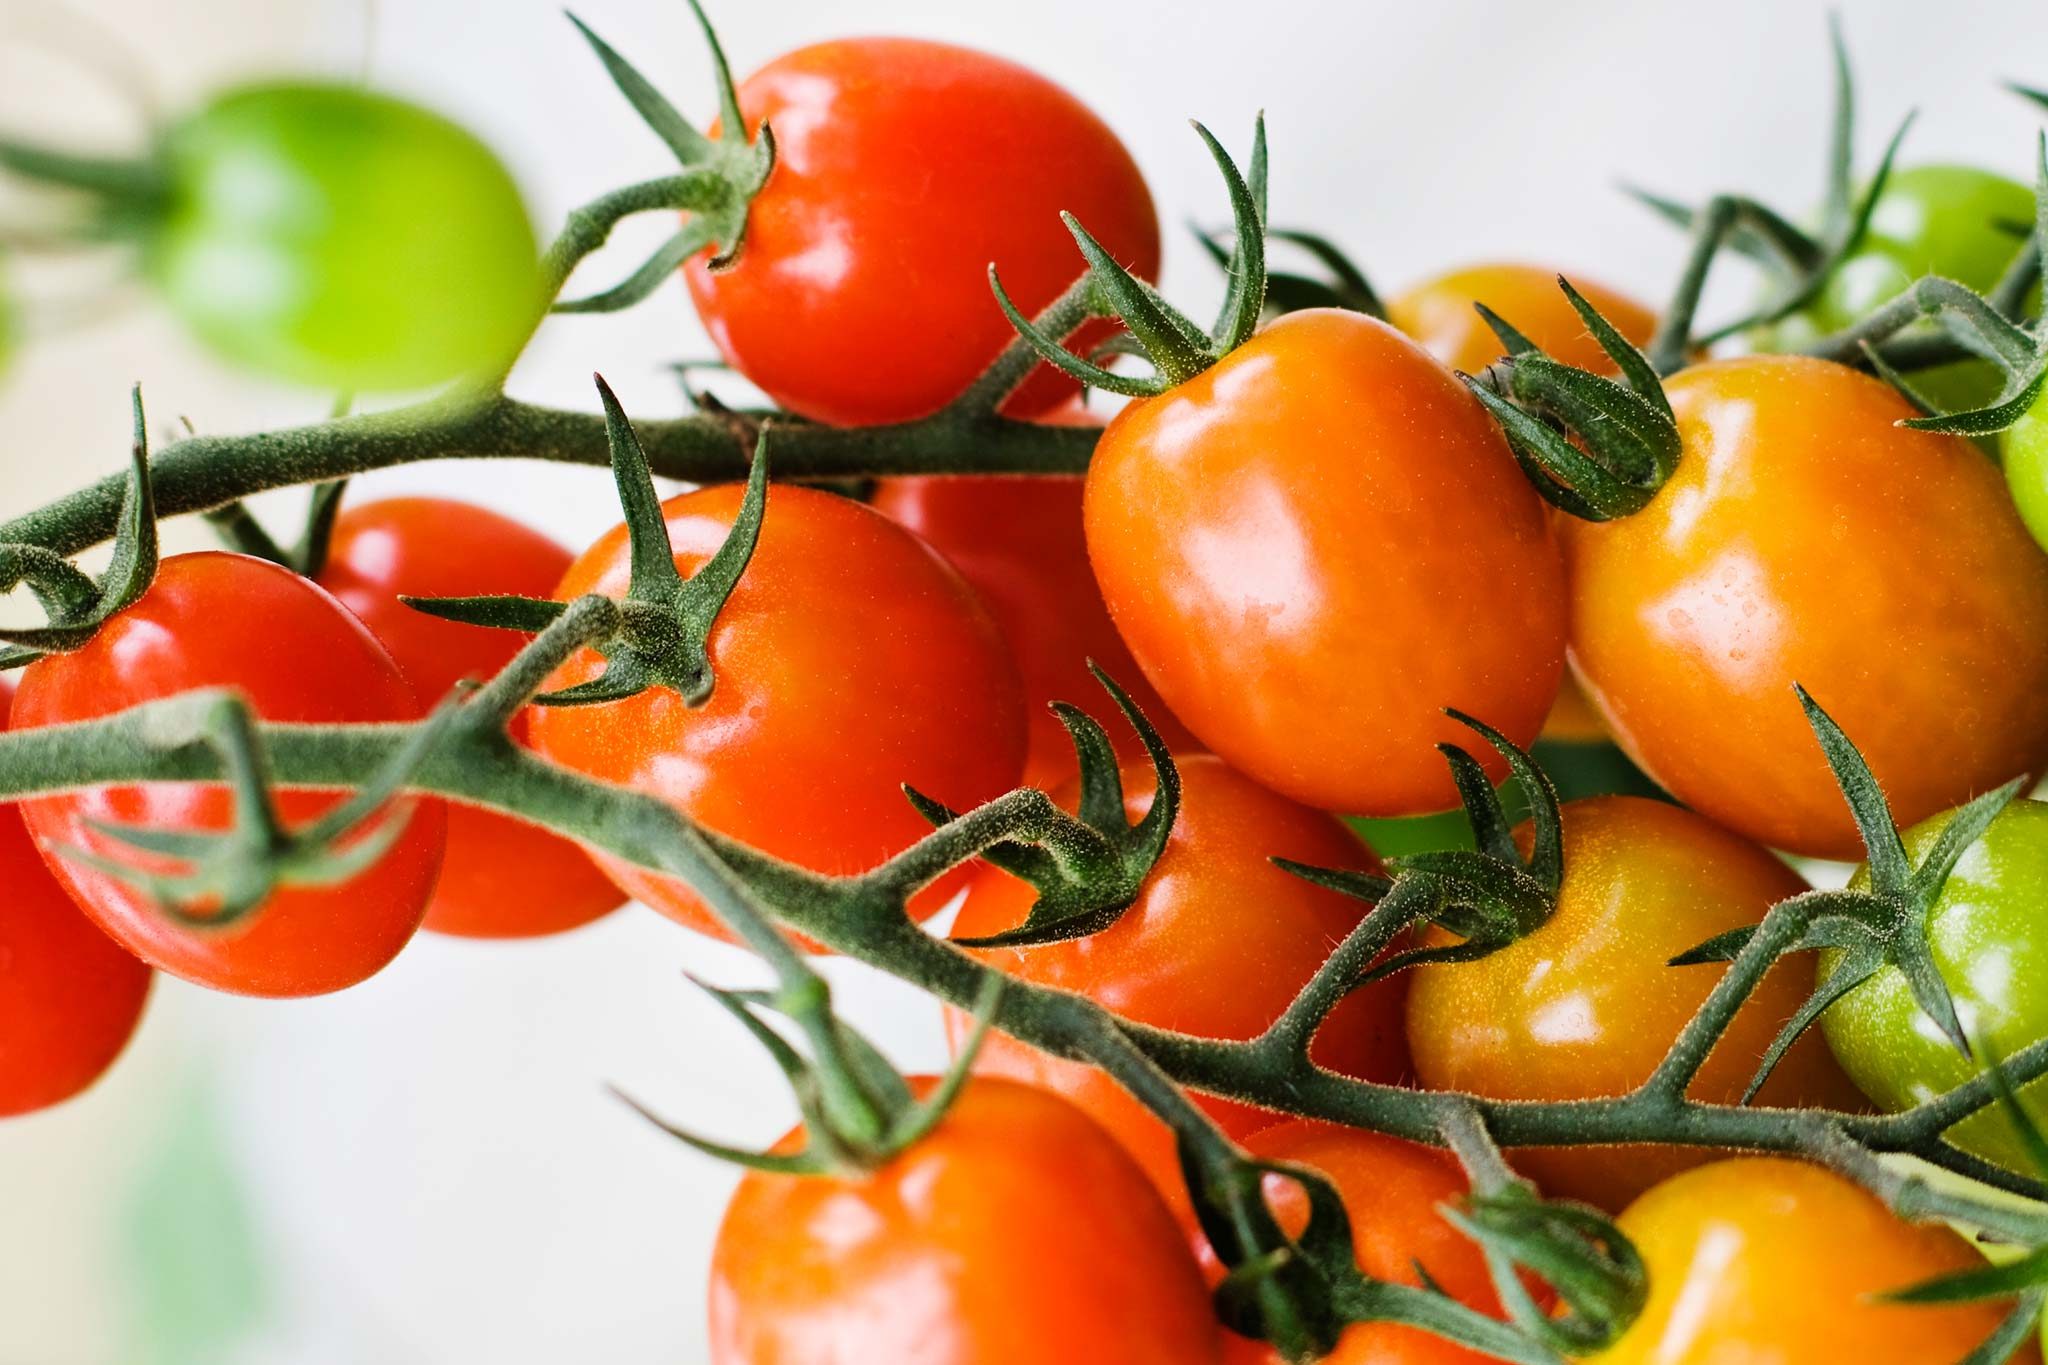 Tomato Treasures:The 9 Sweetest Tomatoes for Your Garden Bounty